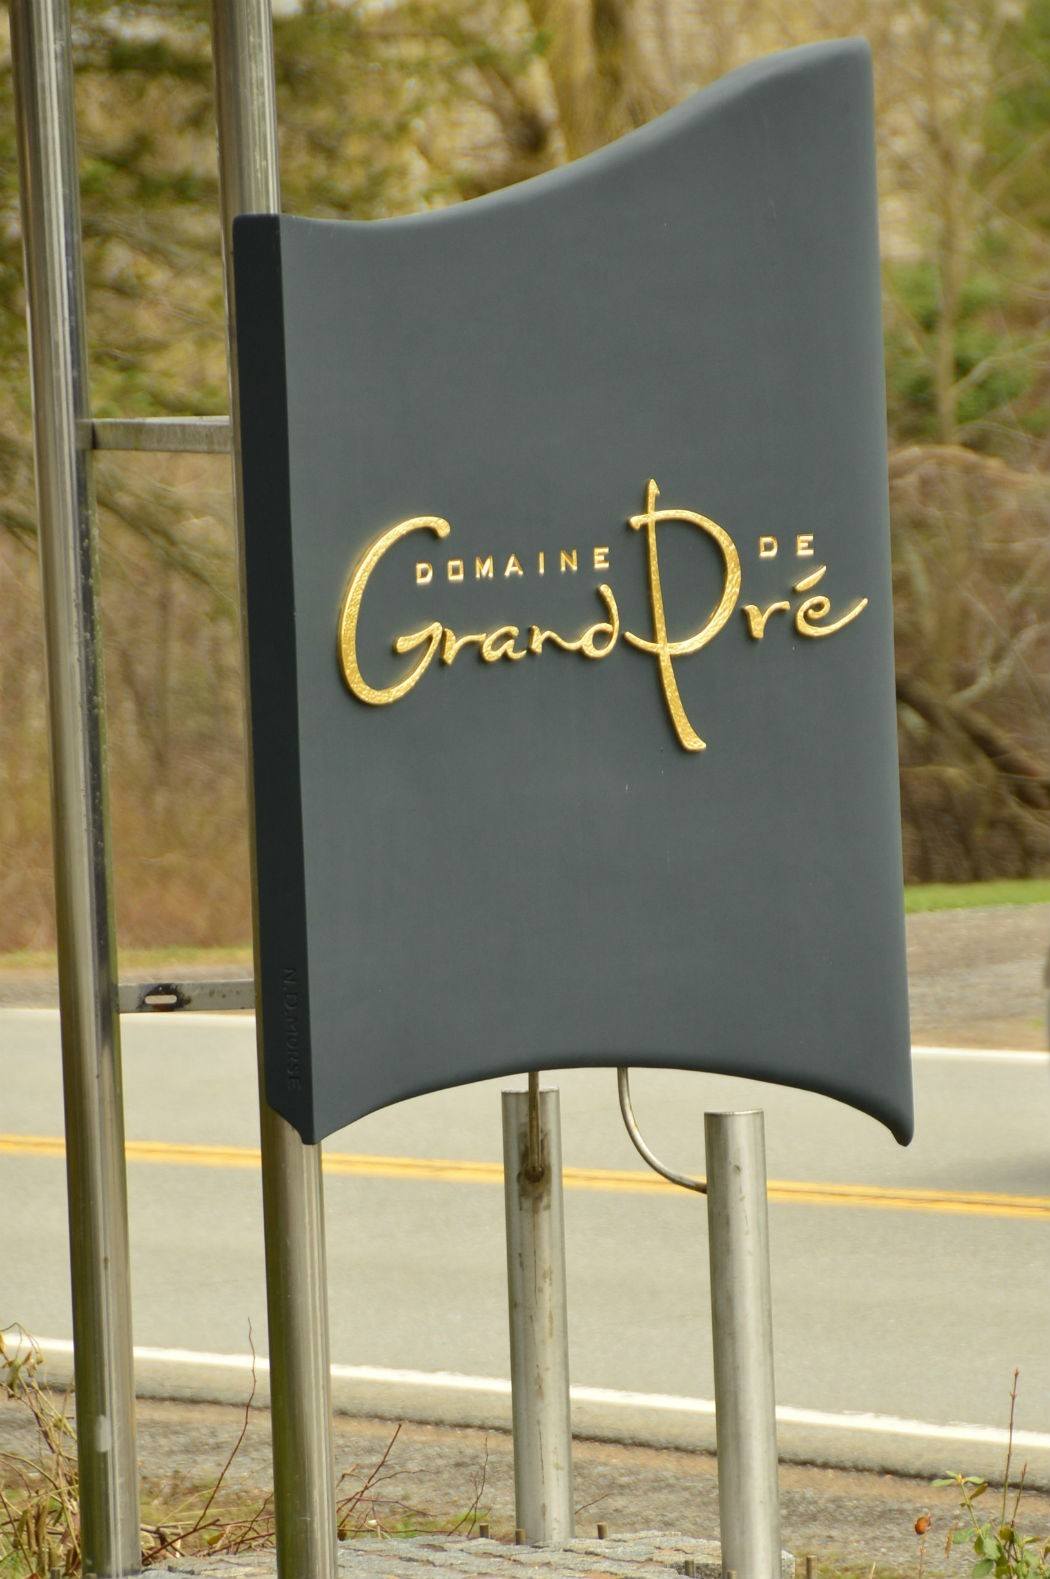 sign for domaine de grand pre winery